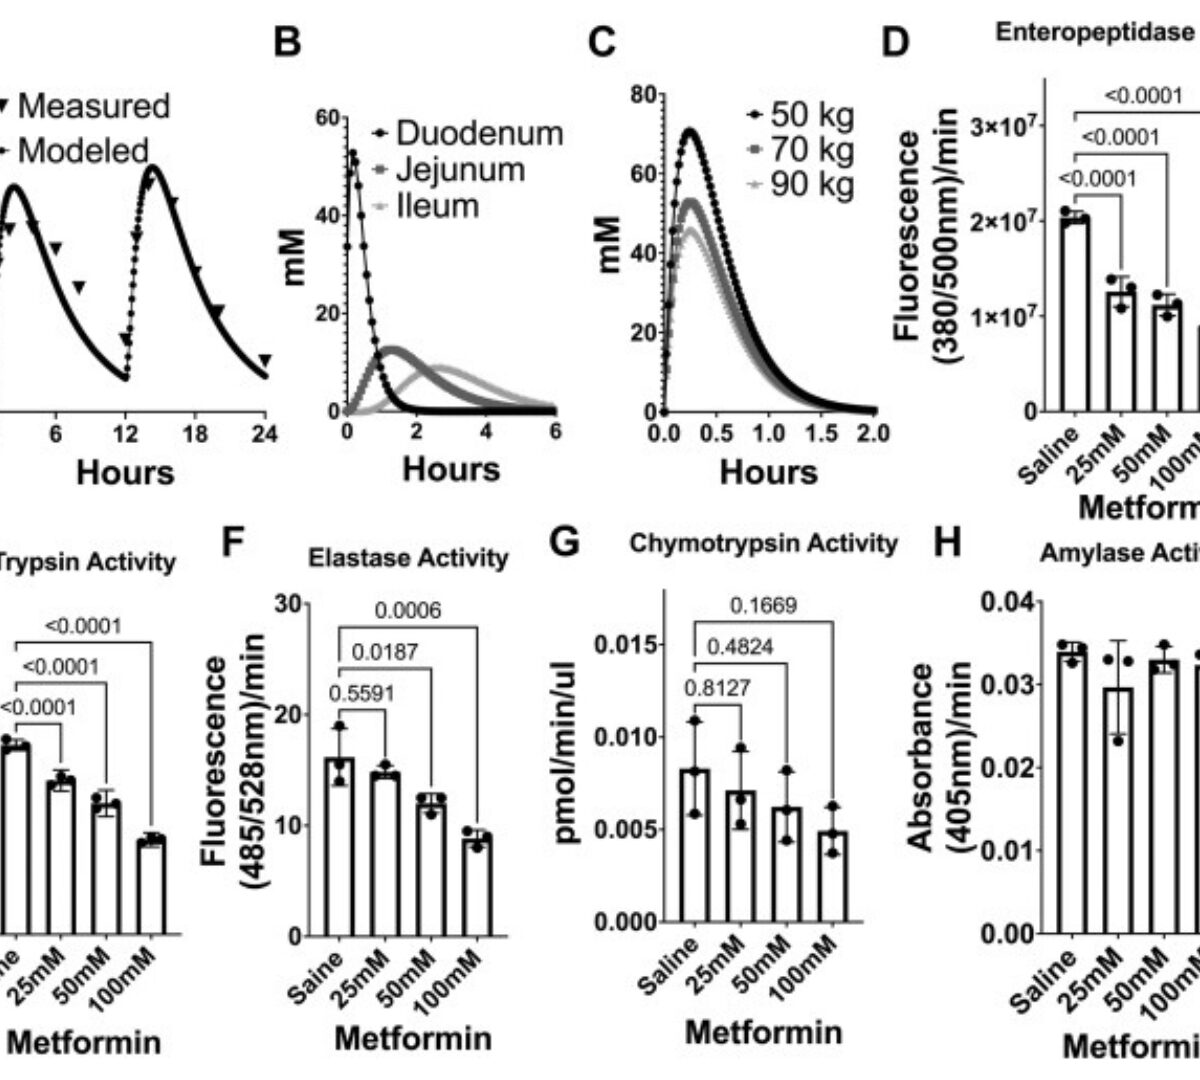 Metformin inhibits digestive proteases and impairs protein digestion in mice